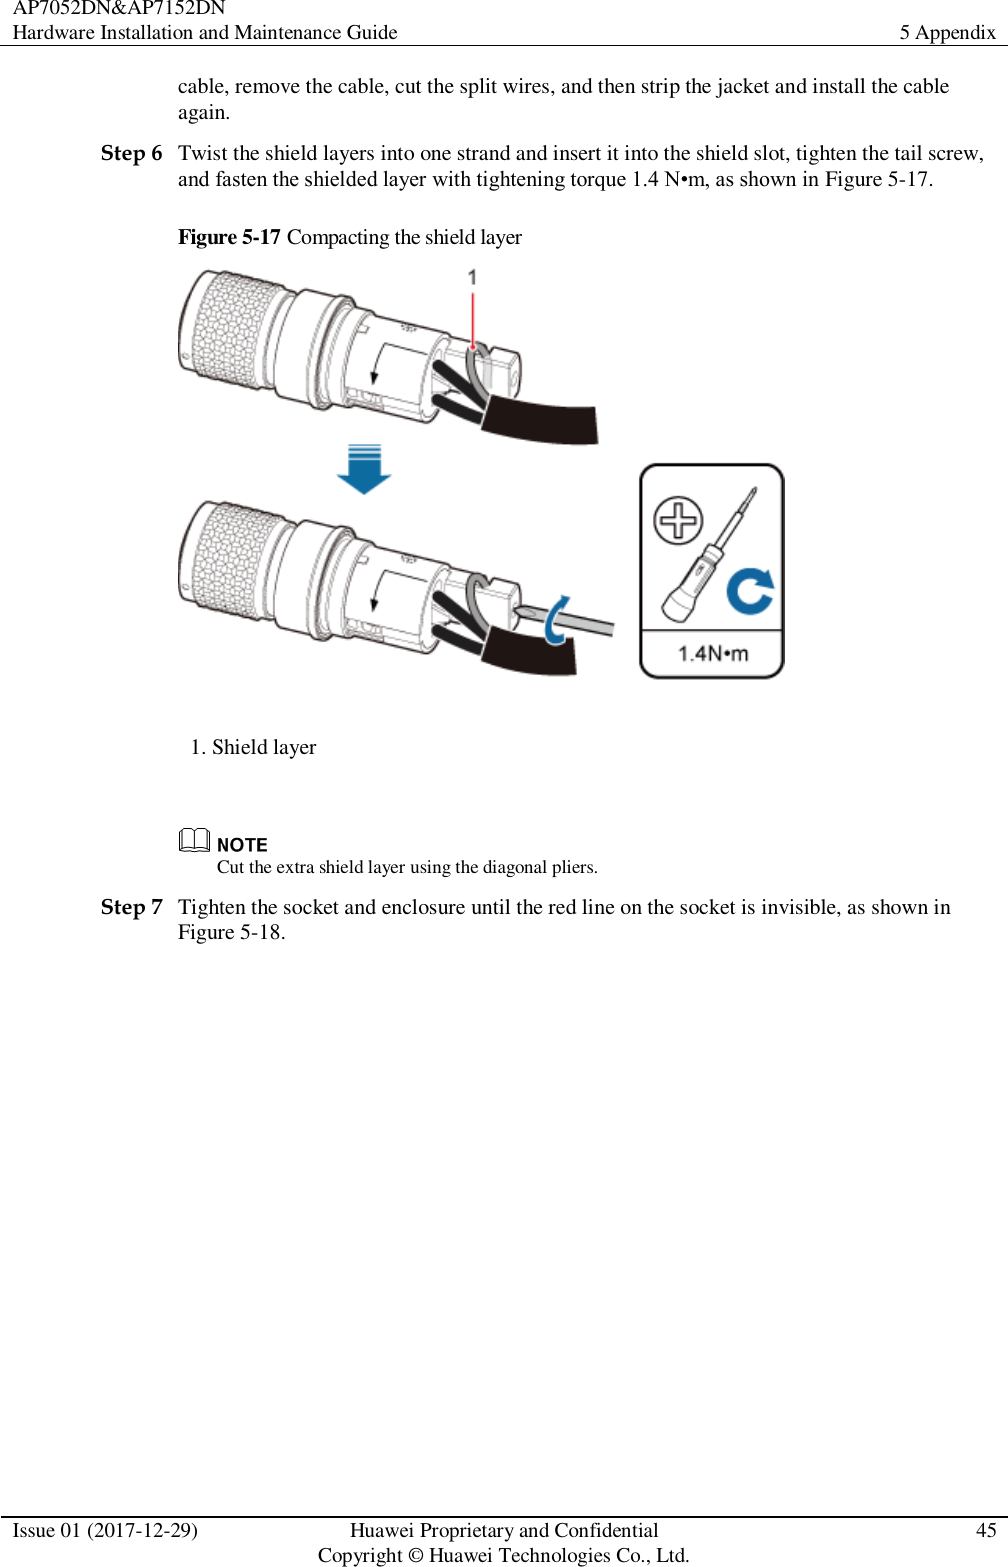 AP7052DN&amp;AP7152DN Hardware Installation and Maintenance Guide 5 Appendix  Issue 01 (2017-12-29) Huawei Proprietary and Confidential                                     Copyright © Huawei Technologies Co., Ltd. 45  cable, remove the cable, cut the split wires, and then strip the jacket and install the cable again.   Step 6 Twist the shield layers into one strand and insert it into the shield slot, tighten the tail screw, and fasten the shielded layer with tightening torque 1.4 N•m, as shown in Figure 5-17. Figure 5-17 Compacting the shield layer  1. Shield layer   Cut the extra shield layer using the diagonal pliers.   Step 7 Tighten the socket and enclosure until the red line on the socket is invisible, as shown in Figure 5-18. 